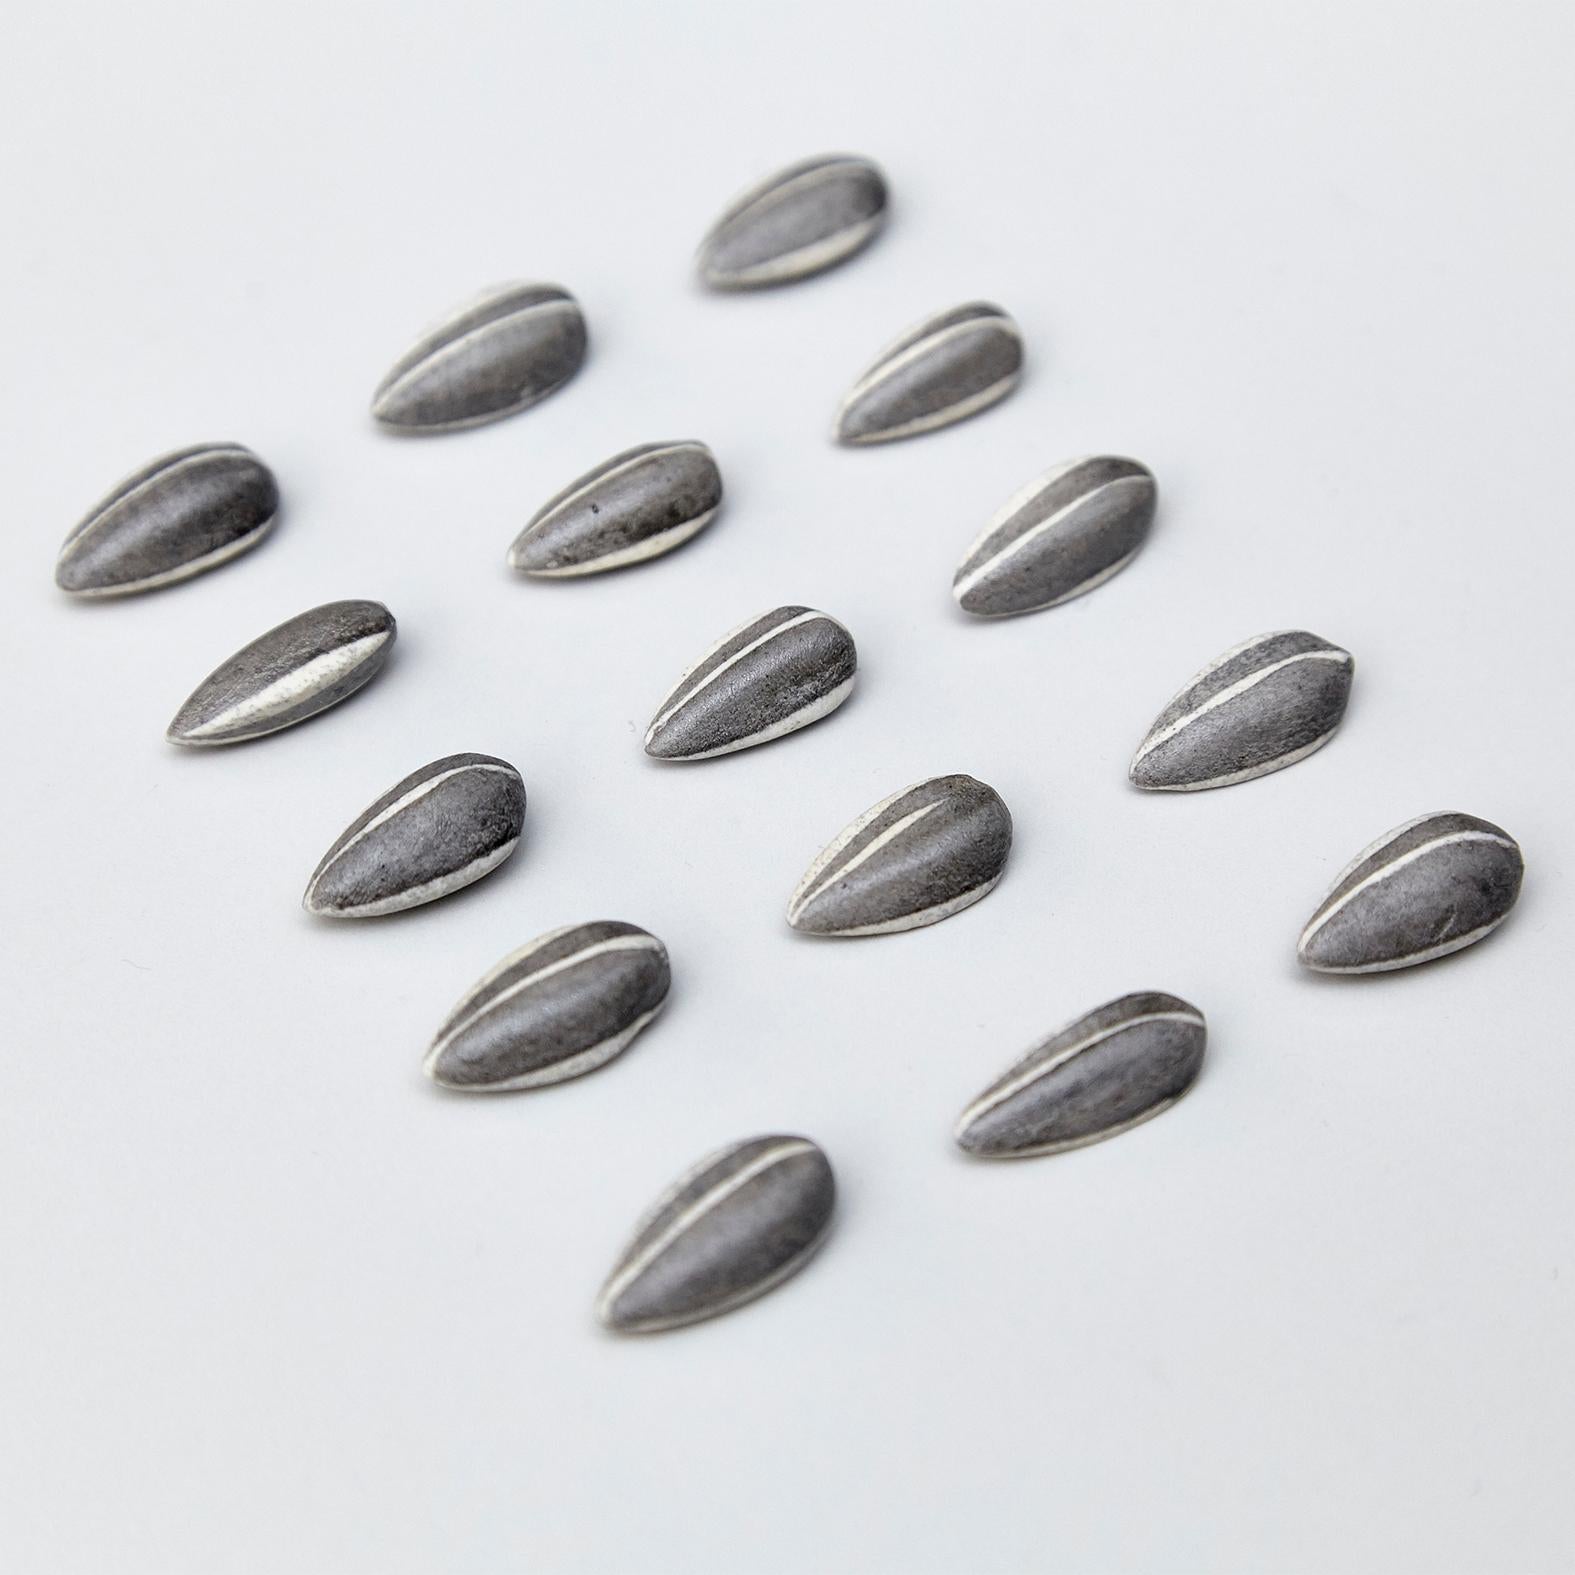 Chinese Ai Weiwei The Unilever Series Fifteen Sunflower Seeds, 2010 - Free Shipping